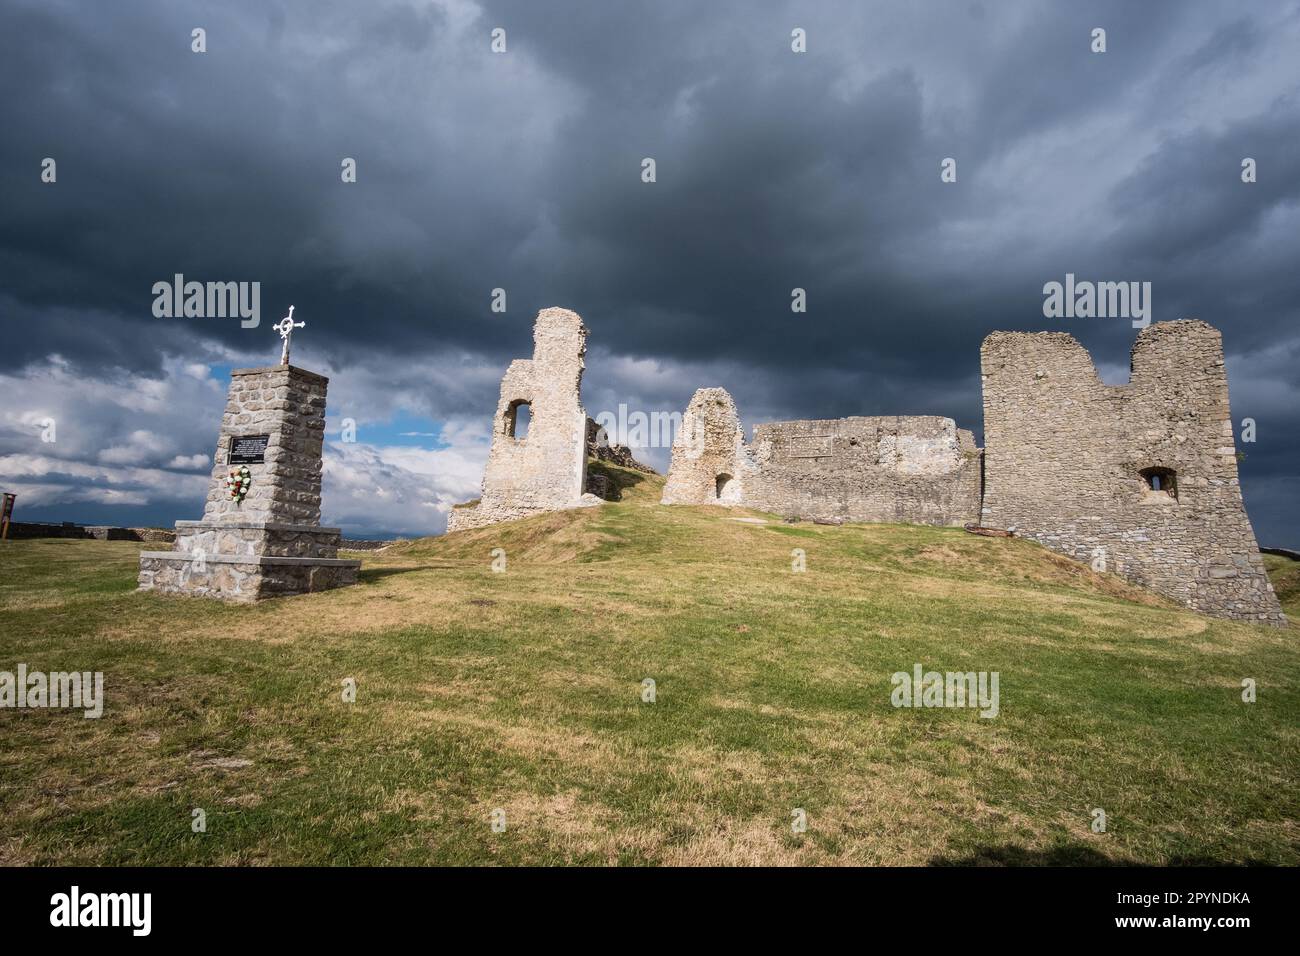 Ruined Medieval fortress stone castle Branc Hrad in Podbranch village, Myjava district of Little Carpathian mountains, Slovakia Stock Photo